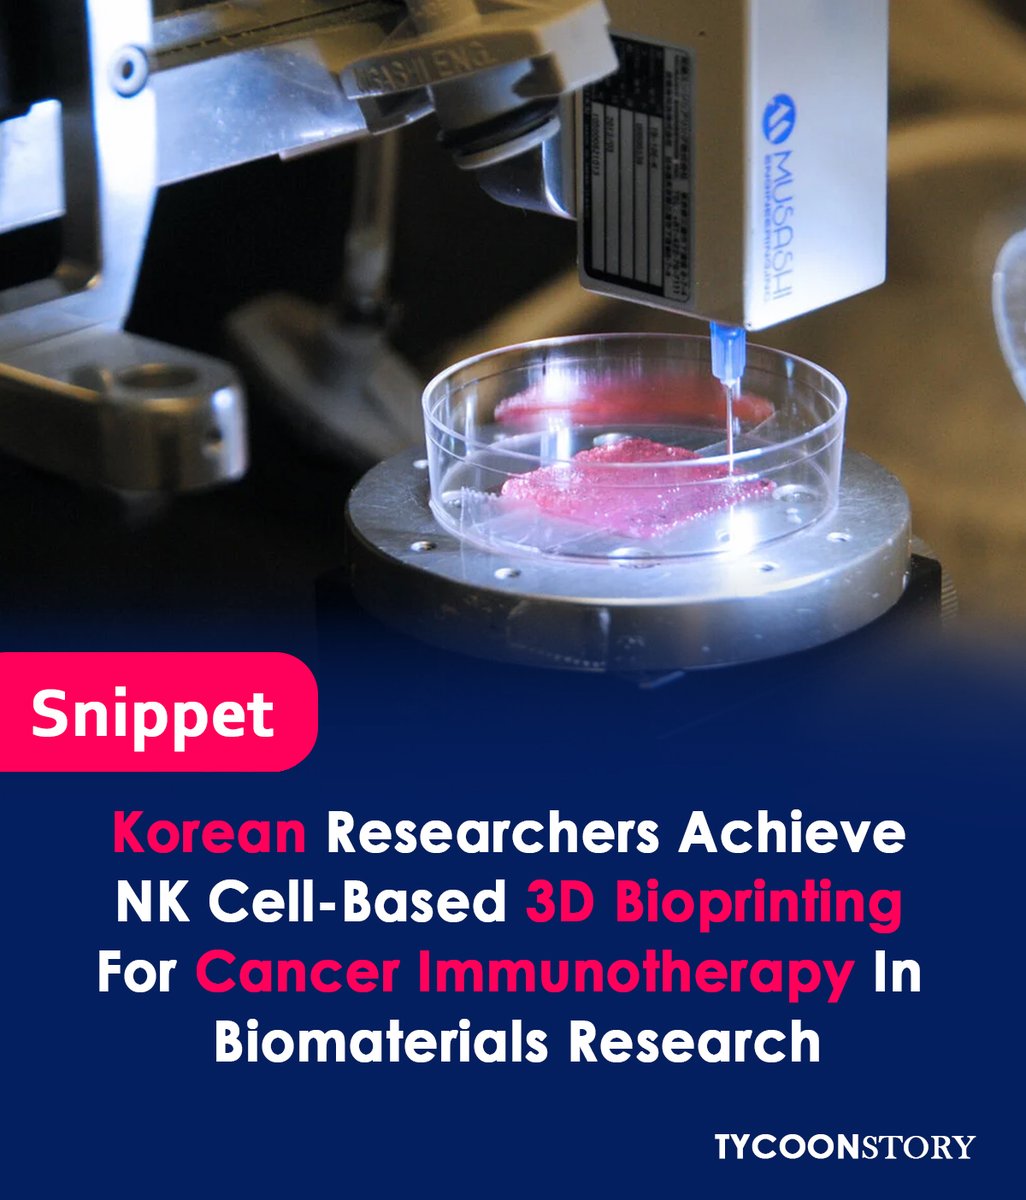 NK cell-based 3D bioprinting for cancer treatment was accomplished and published in Biomaterials Research

#NKCells #Immunotherapy #CancerResearch #Nanotechnology #MedicalResearch #Immunology #CellularTherapy #HealthTech #Biotech